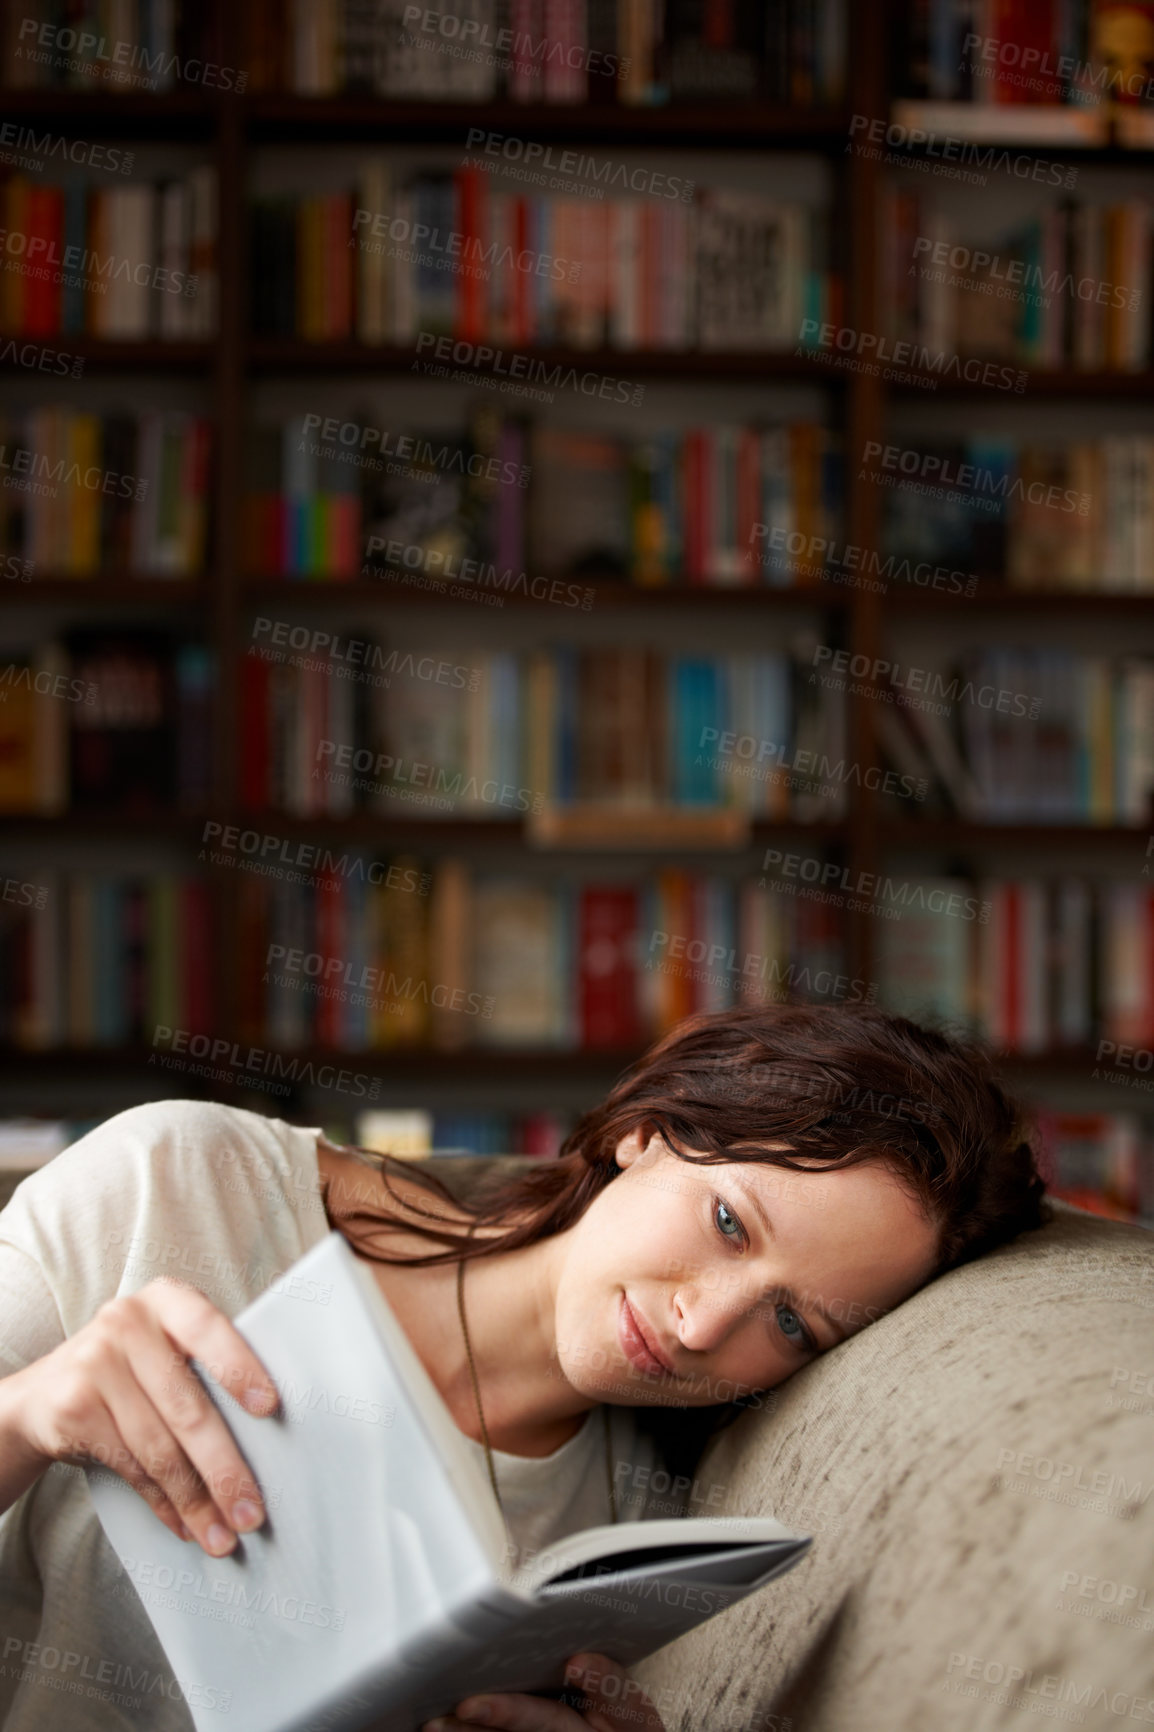 Buy stock photo An attractive young woman relaxing on a sofa with a book - copy space